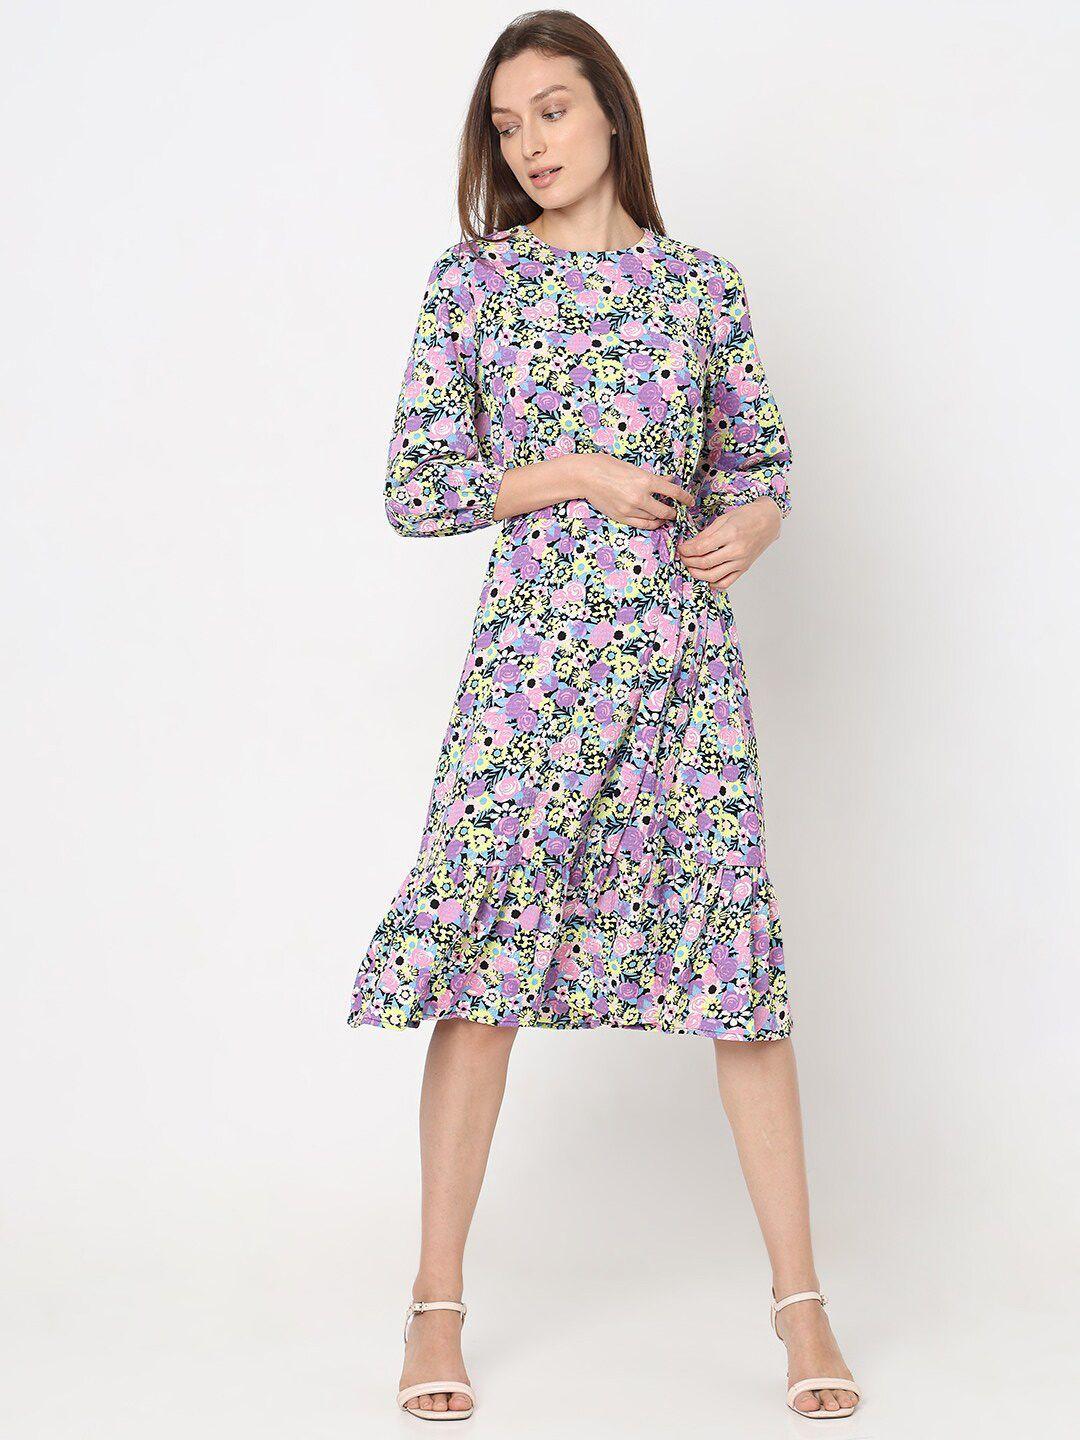 vero moda floral printed bishop sleeve layered fit and flaredress